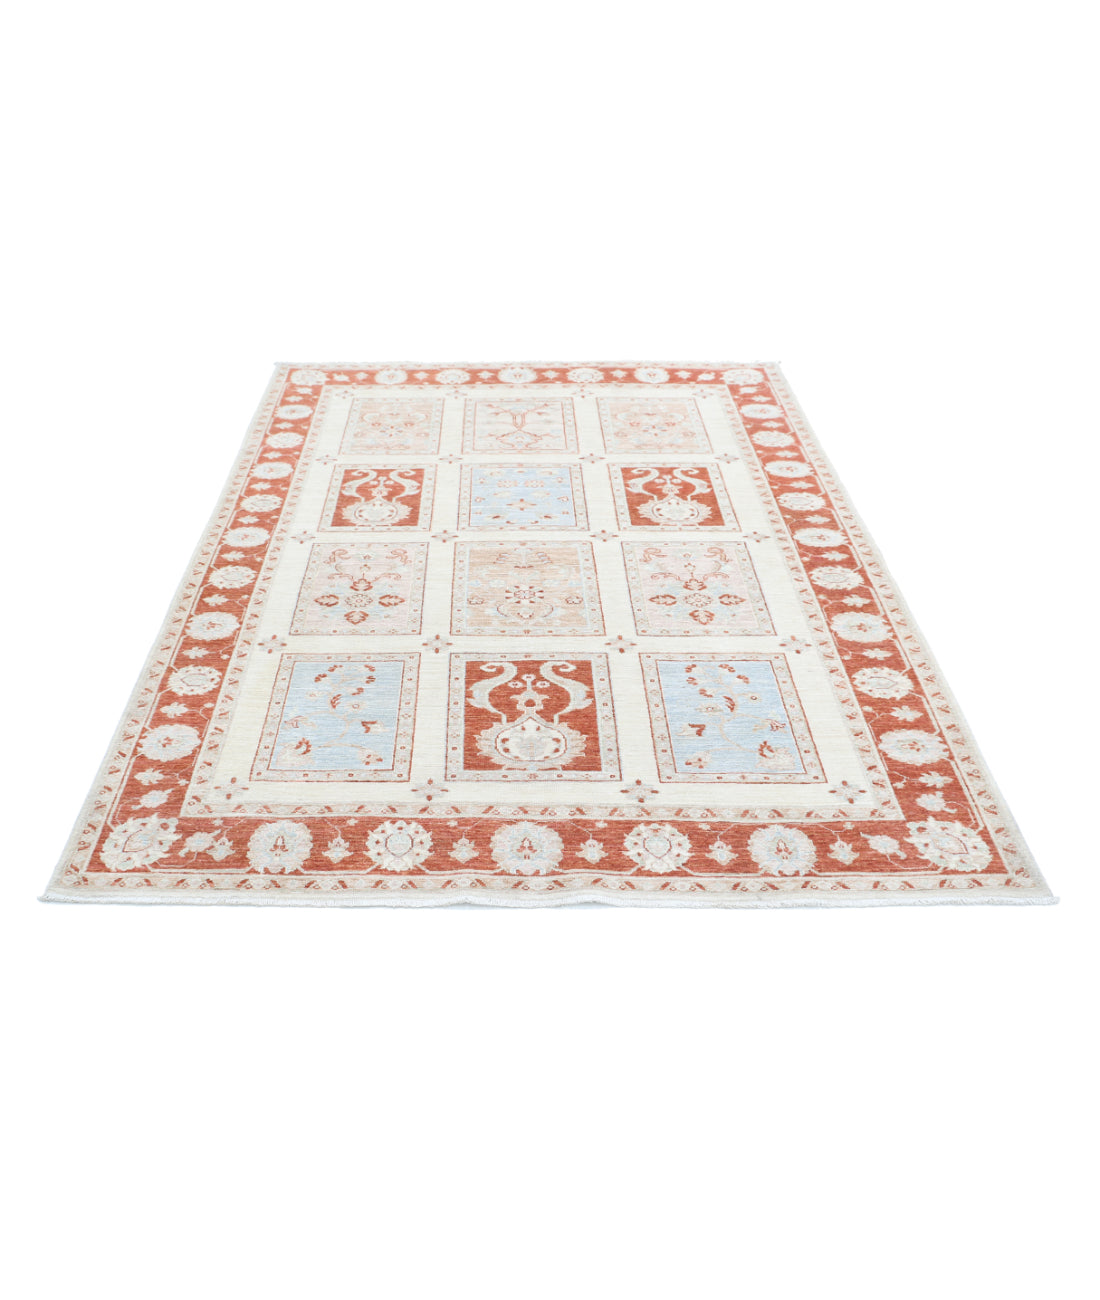 Hand Knotted Bakhtiari Wool Rug - 5'6'' x 7'2'' 5'6'' x 7'2'' (165 X 215) / Ivory / Red